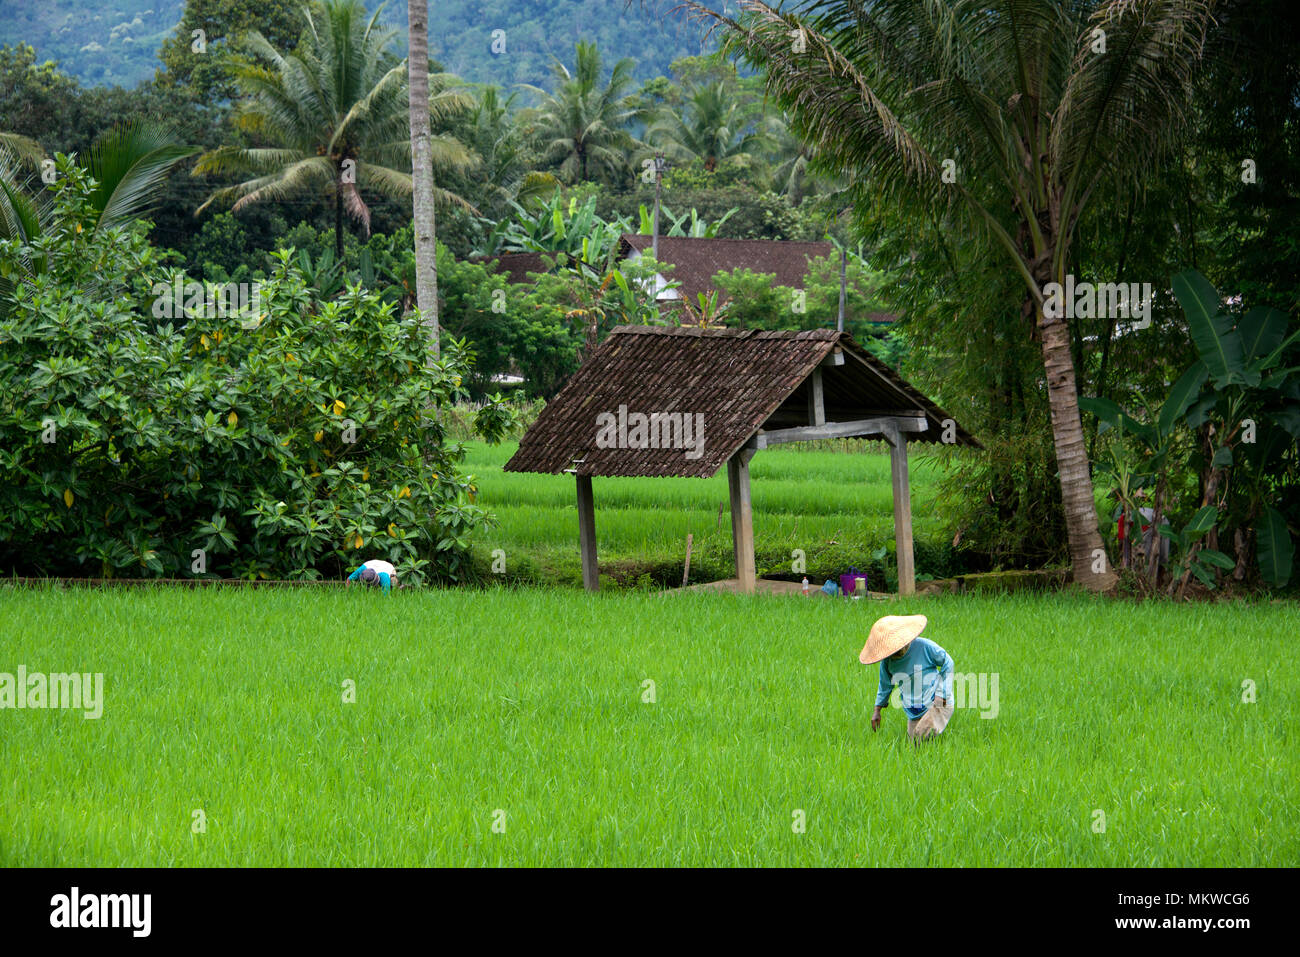 Rural scene two people in rice field Megelang District Central Java Indonesia Stock Photo